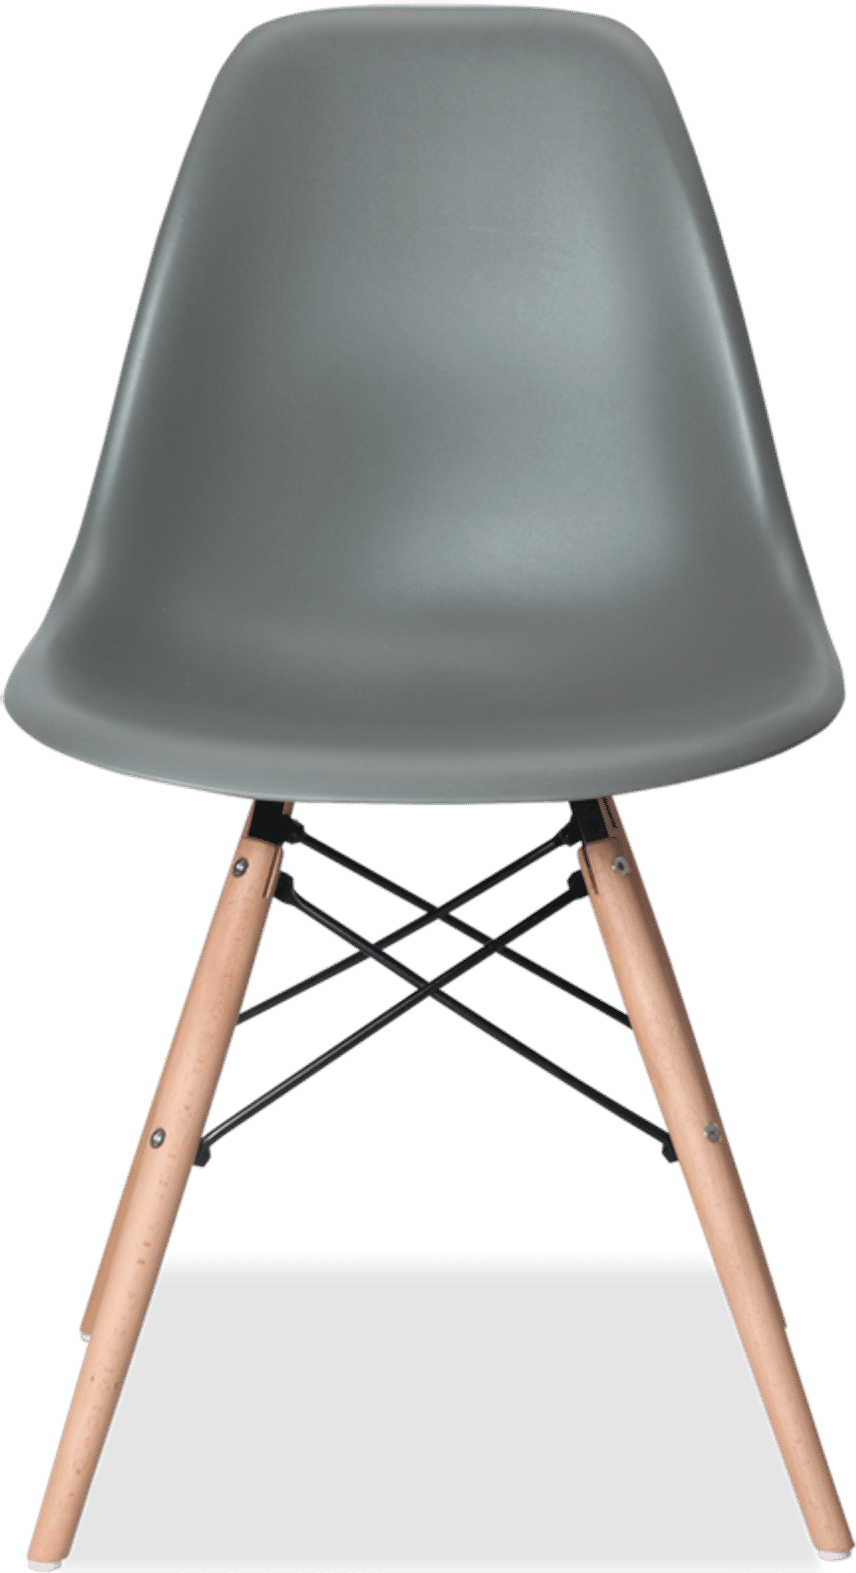 DSW Style Chair Moss Grey/Light Wood image.